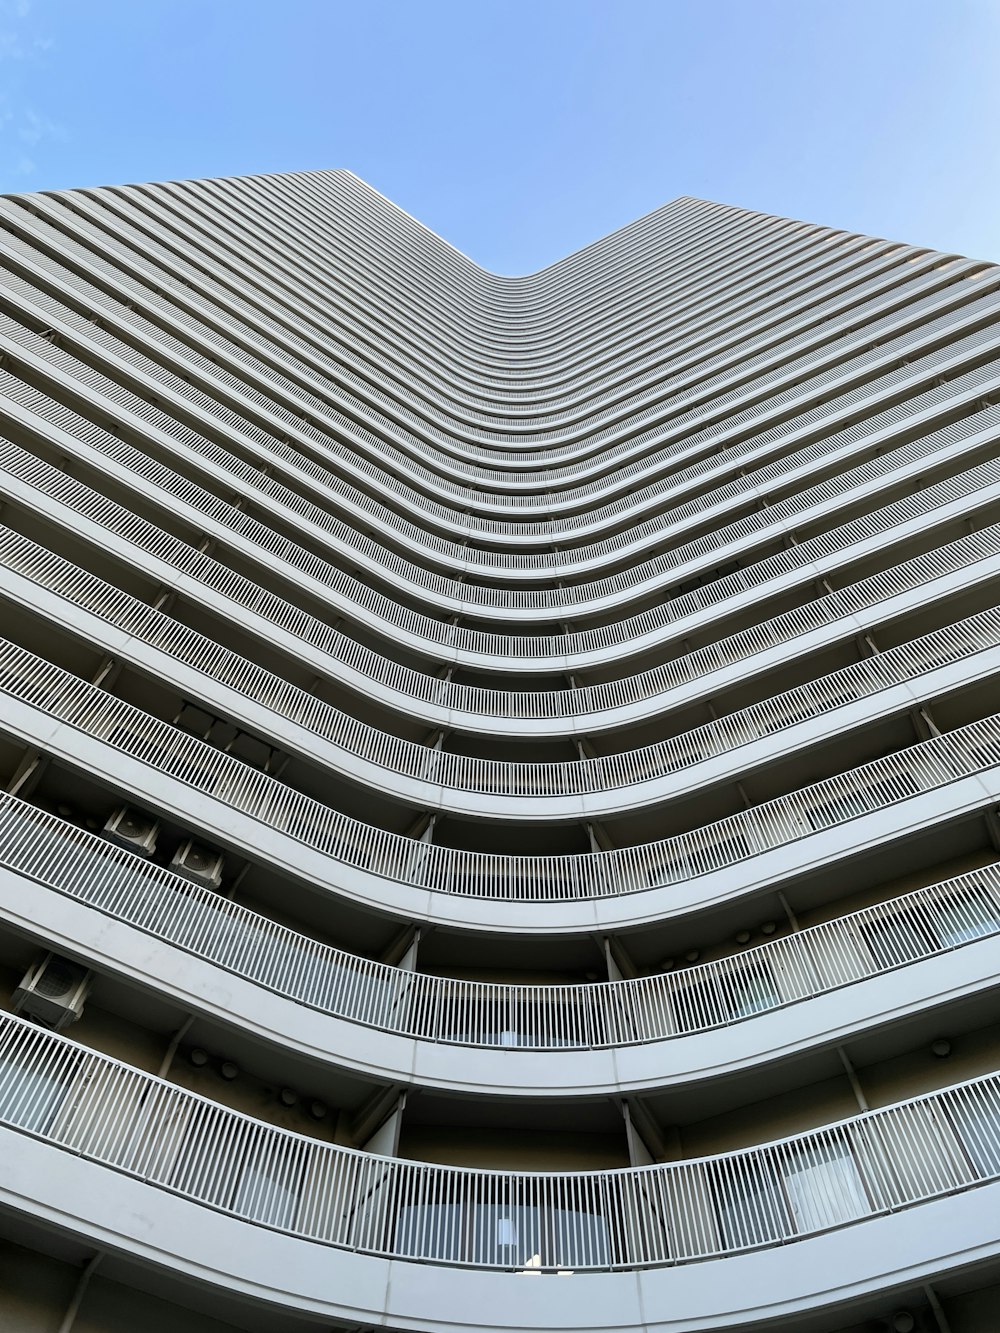 a tall building with balconies and balconies on the sides